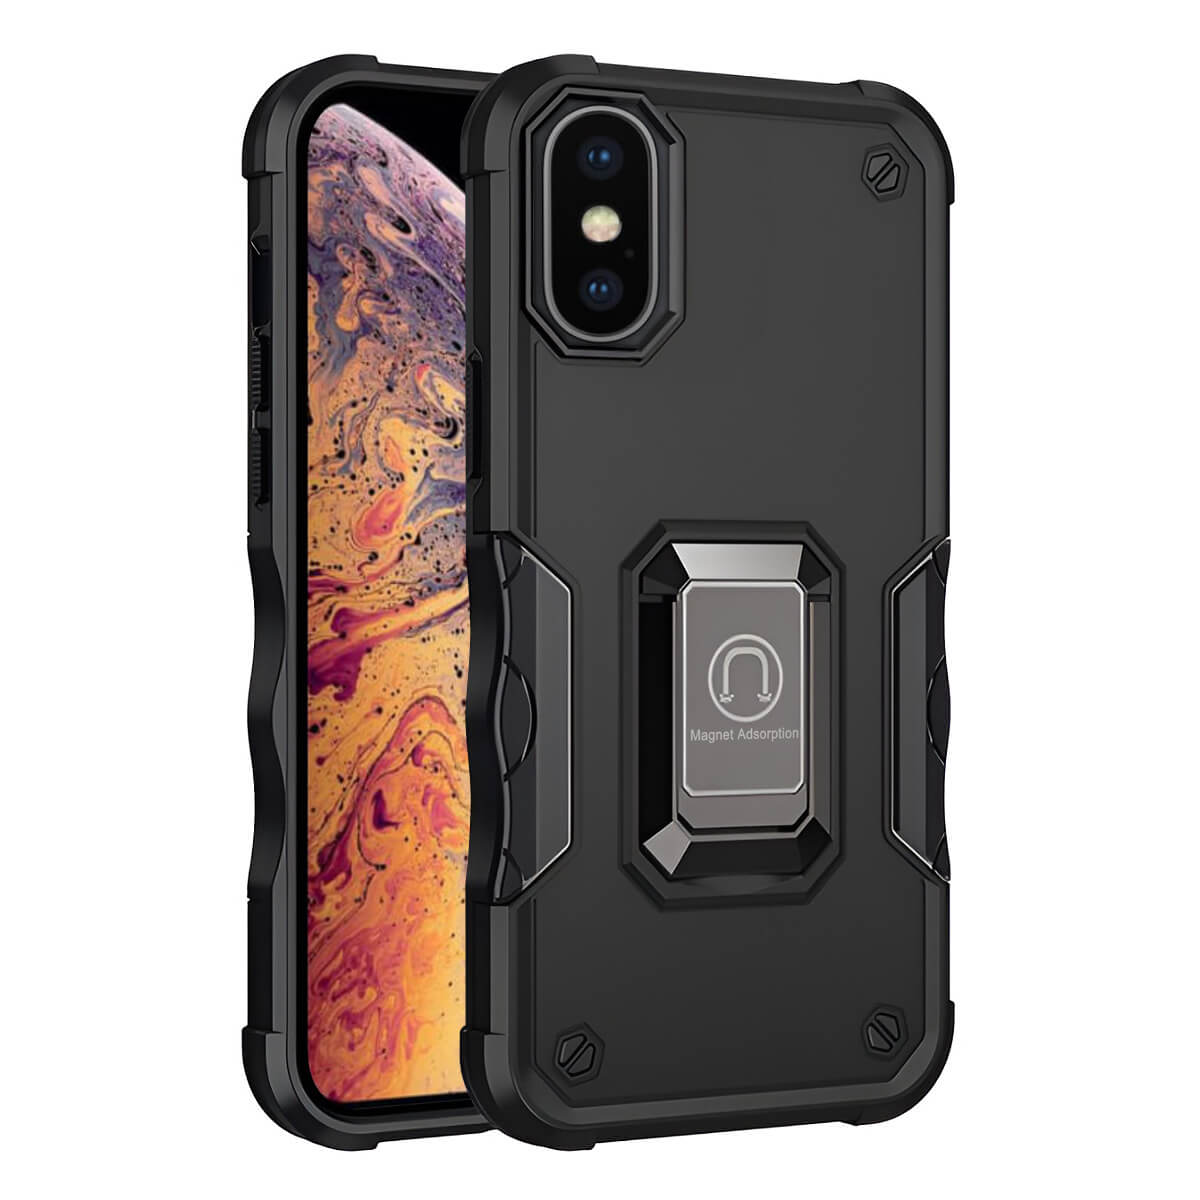 Pop Stand Series iPhone XS Max Magnetic Stand Case